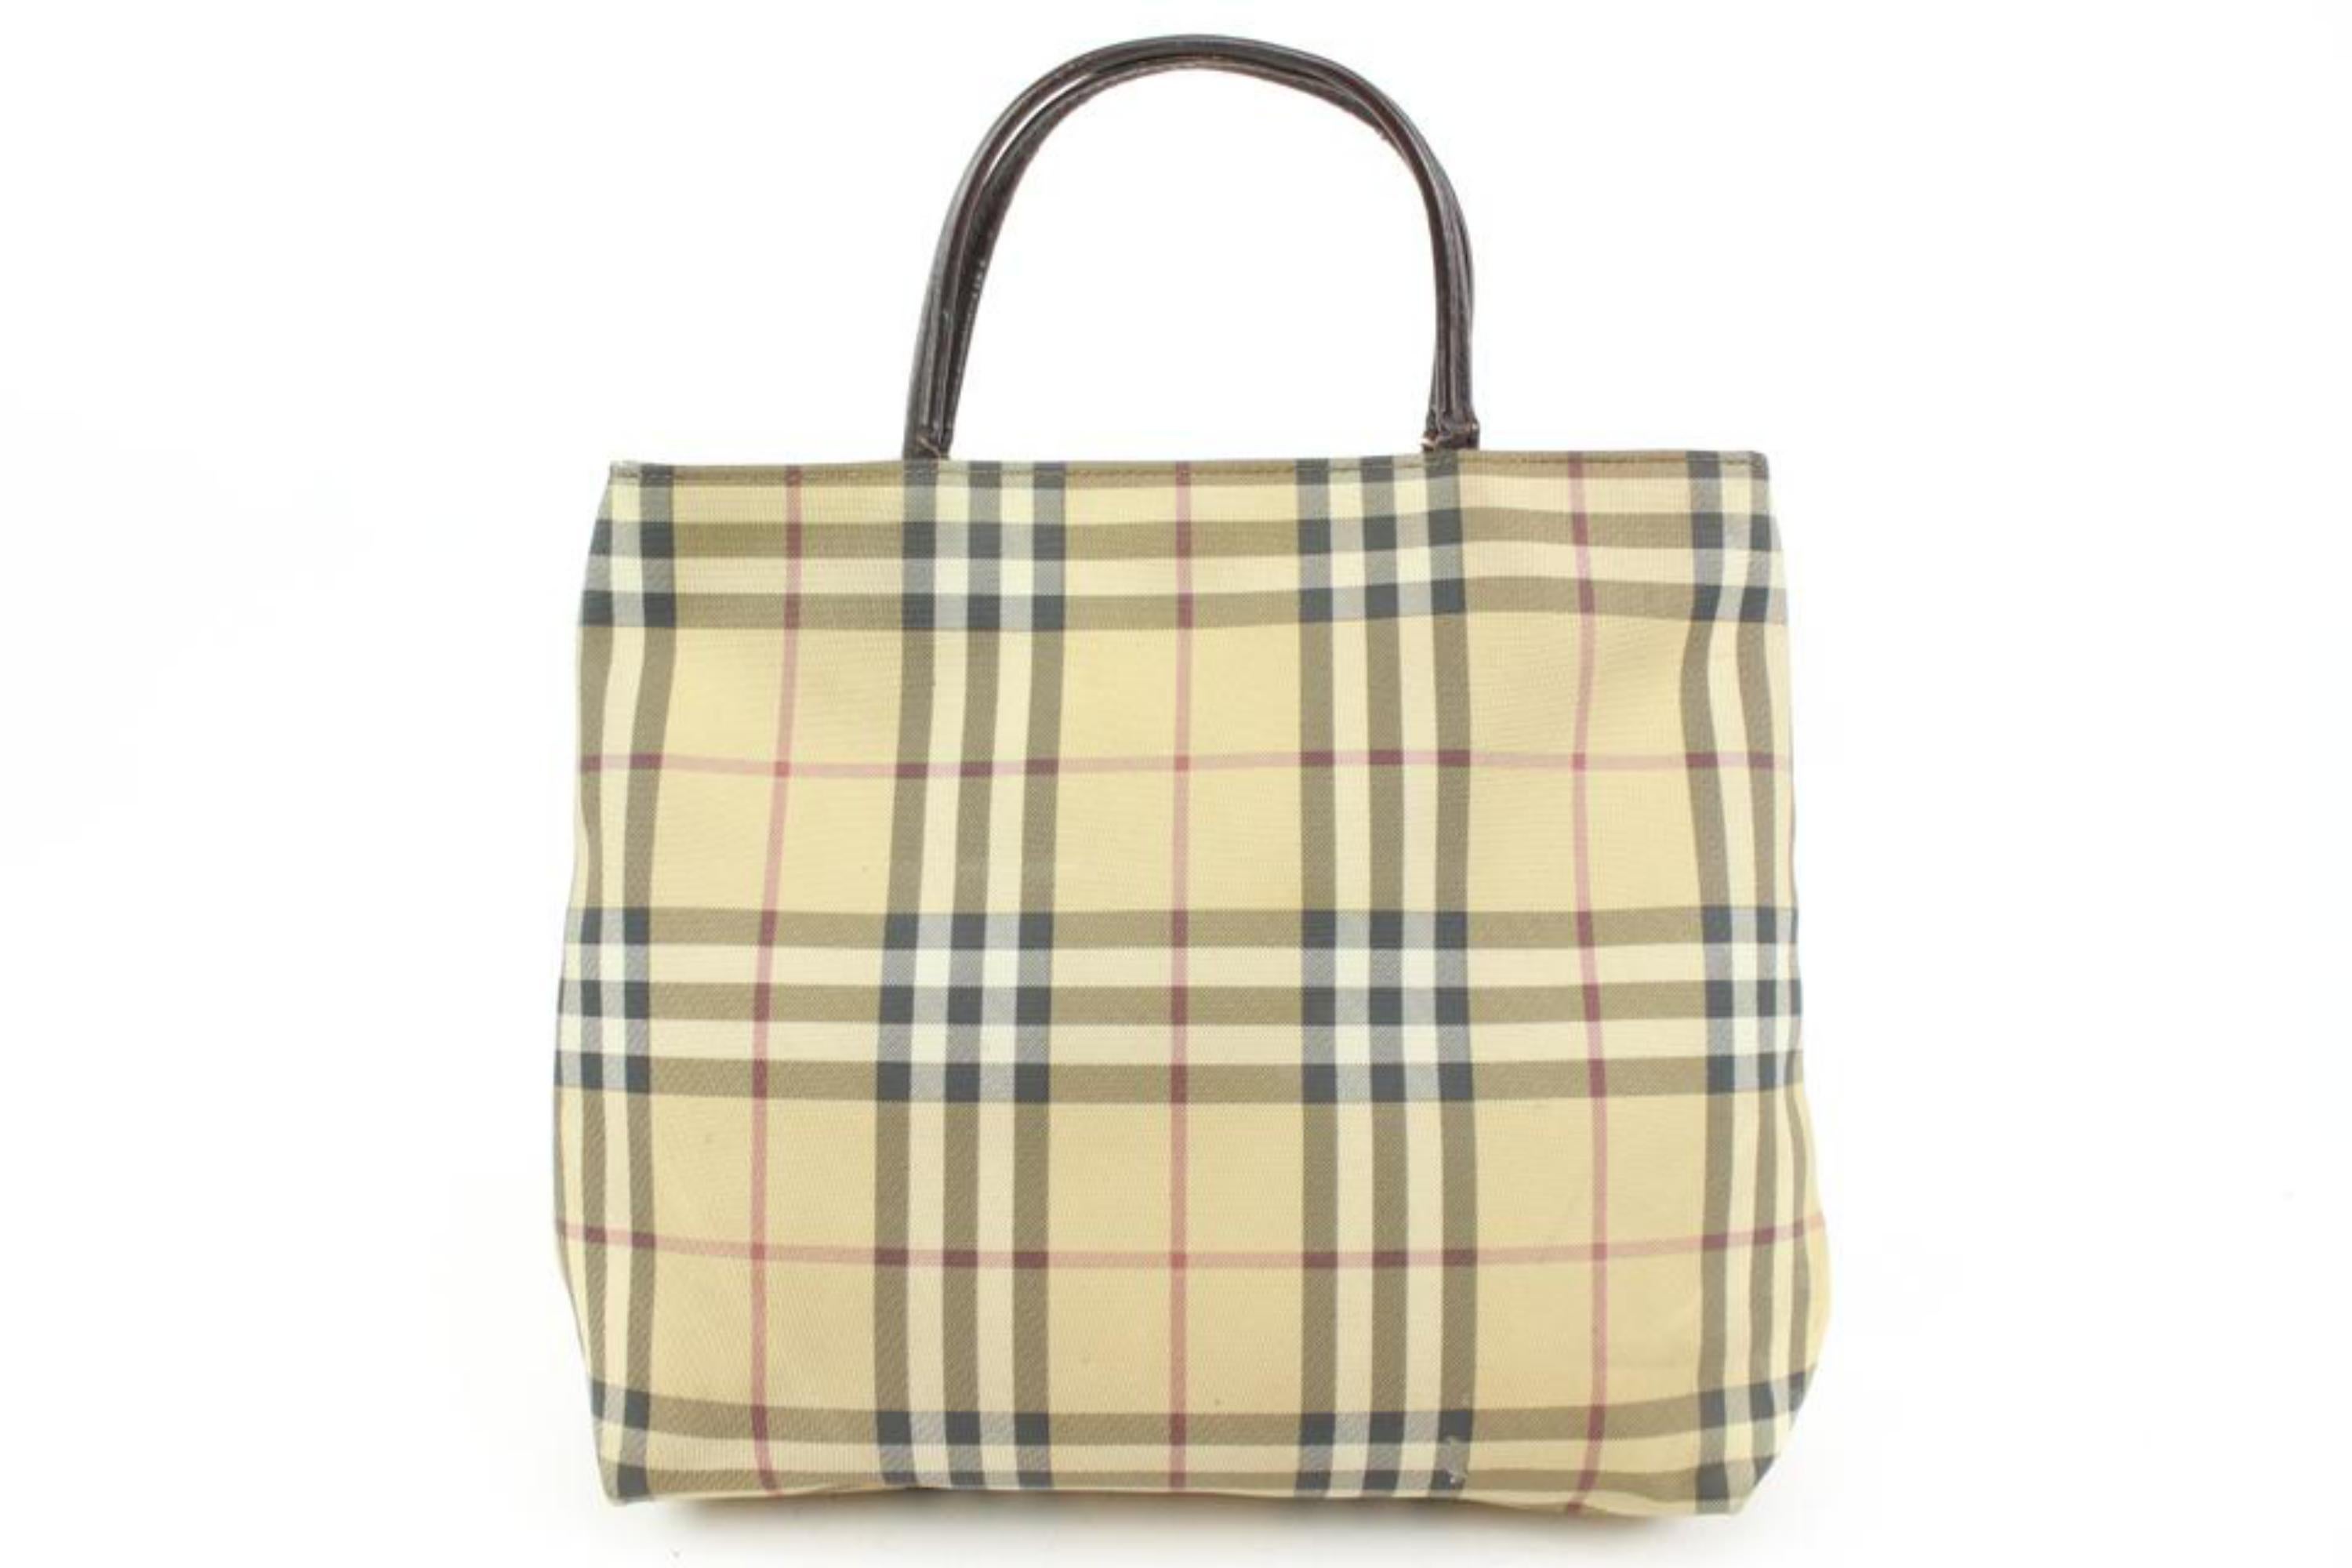 Women's Burberry London Beige Nova Check Coated Canvas Tote Bag Upcycle Ready 9b419s For Sale